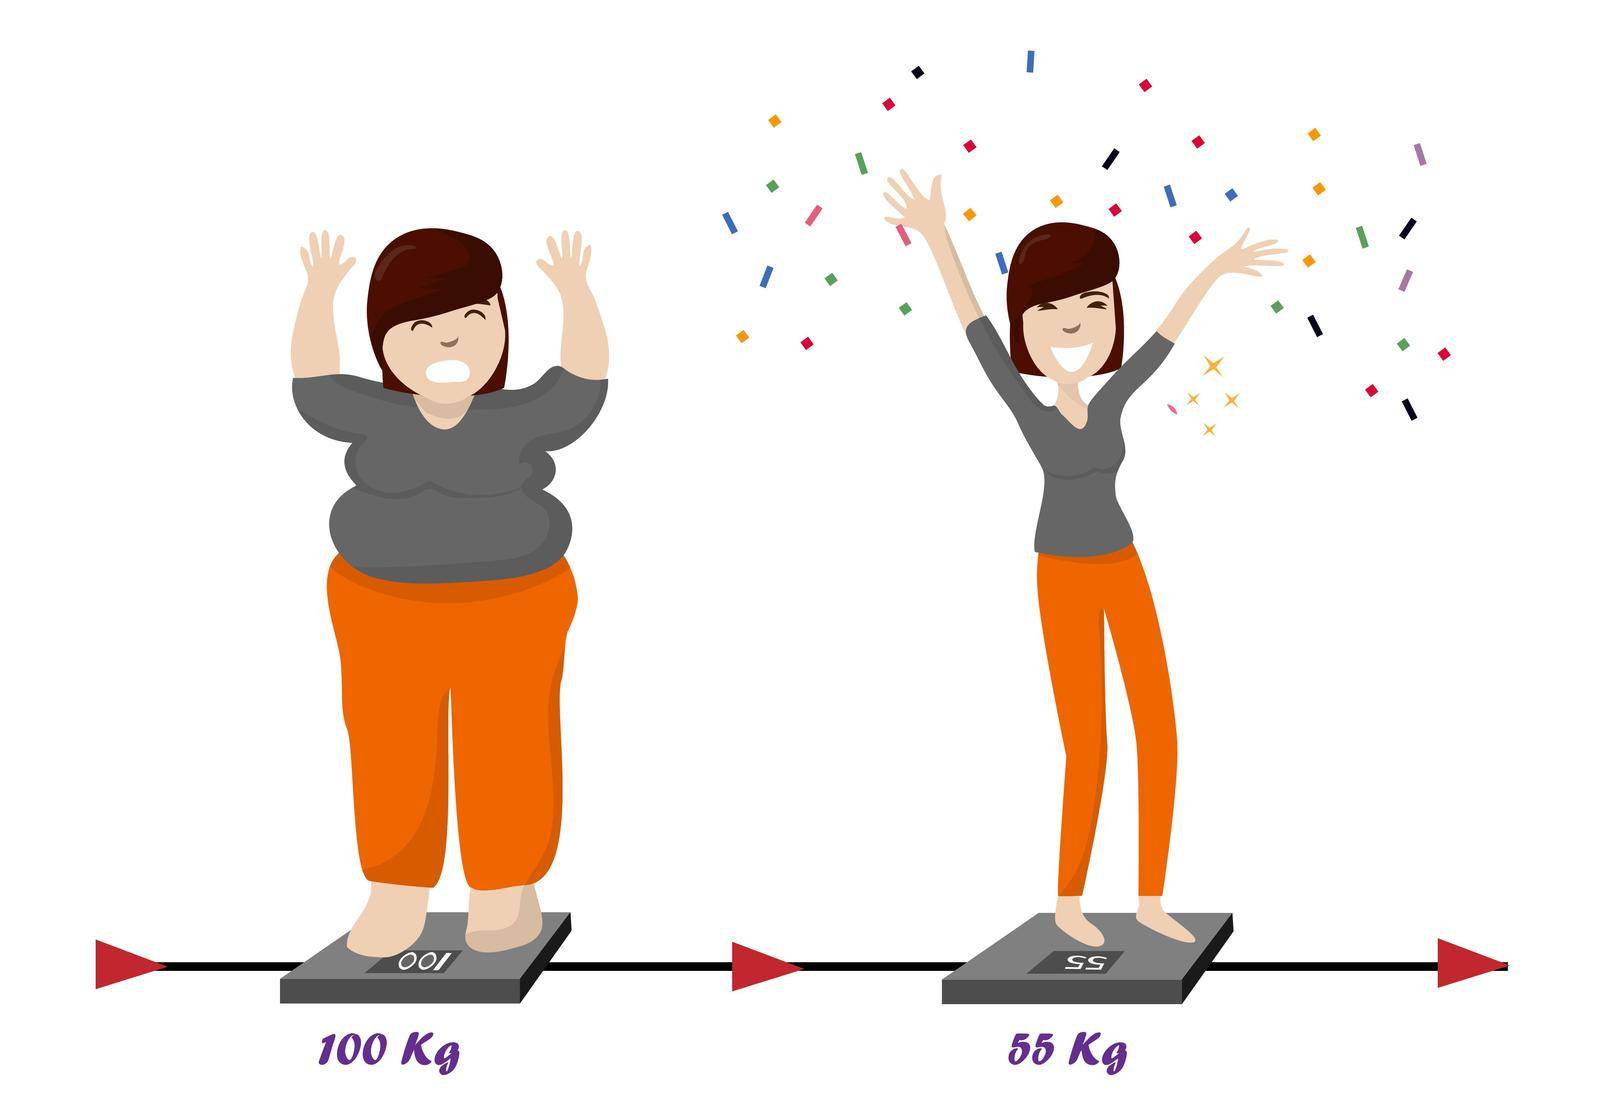 Fat woman weighs a lot, she is sad. And a skinny woman, she can be happy about losing weight. Weight loss ideas Vector illustration